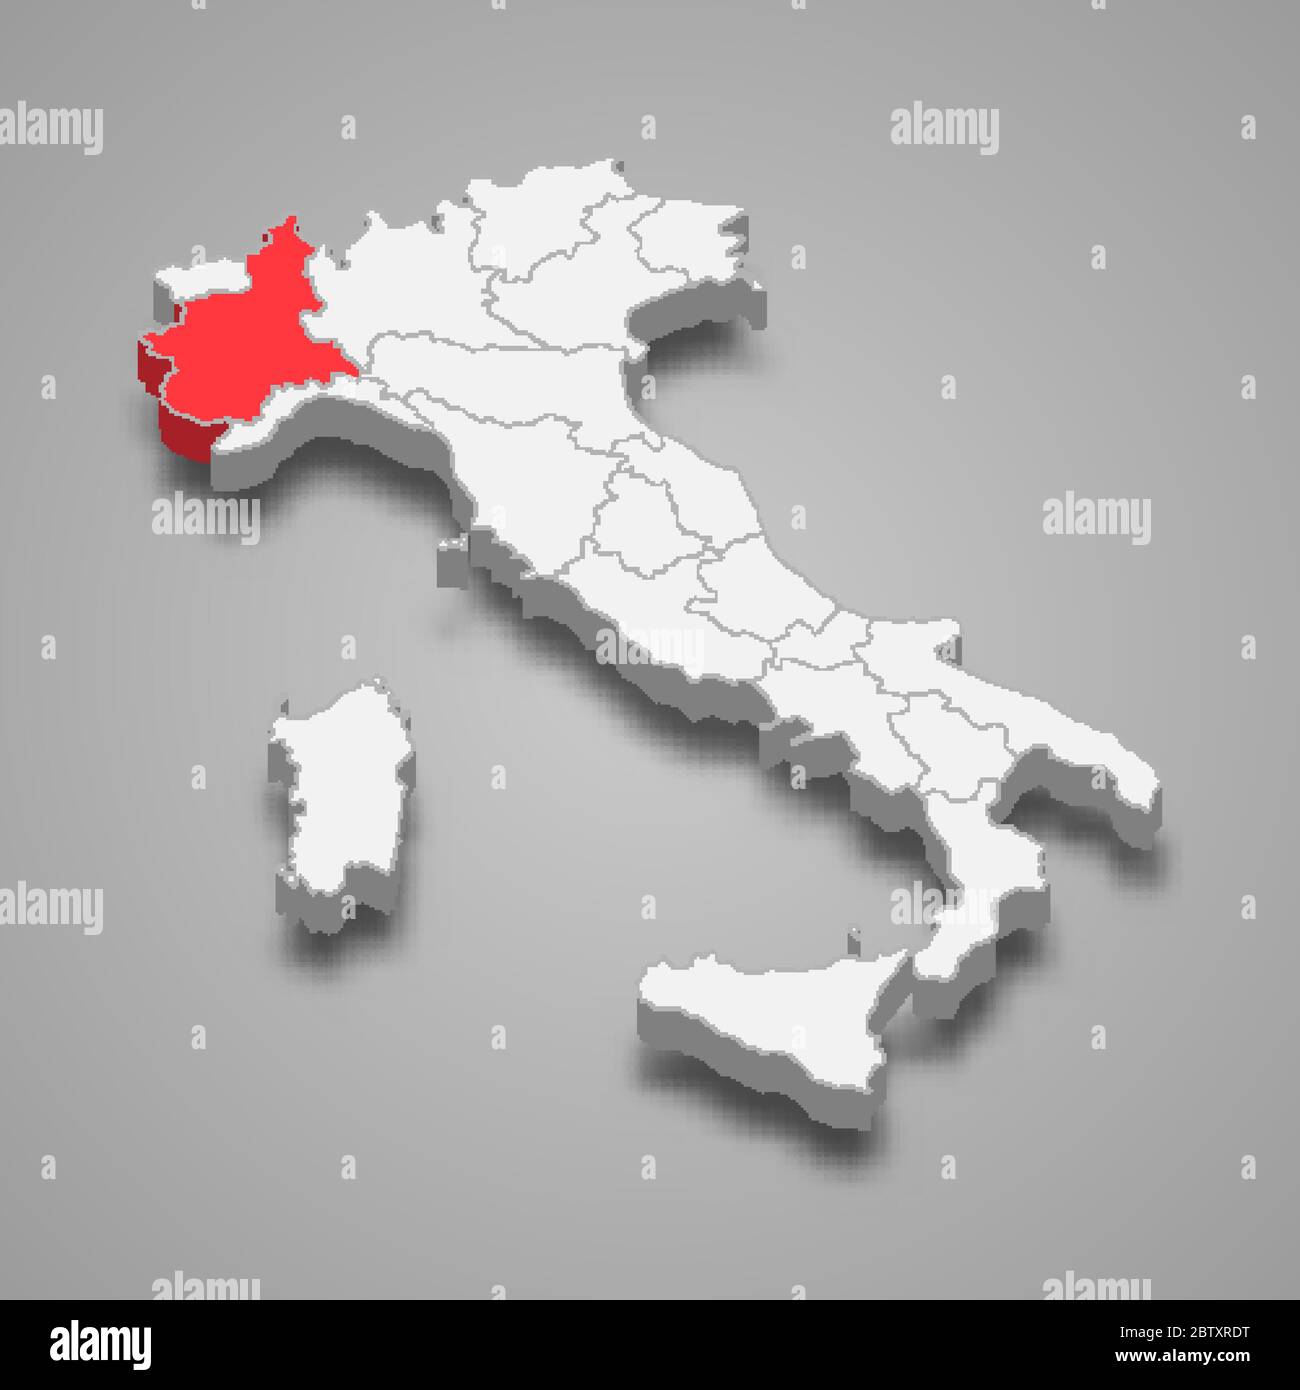 Piedmont region location within Italy 3d map Stock Vector